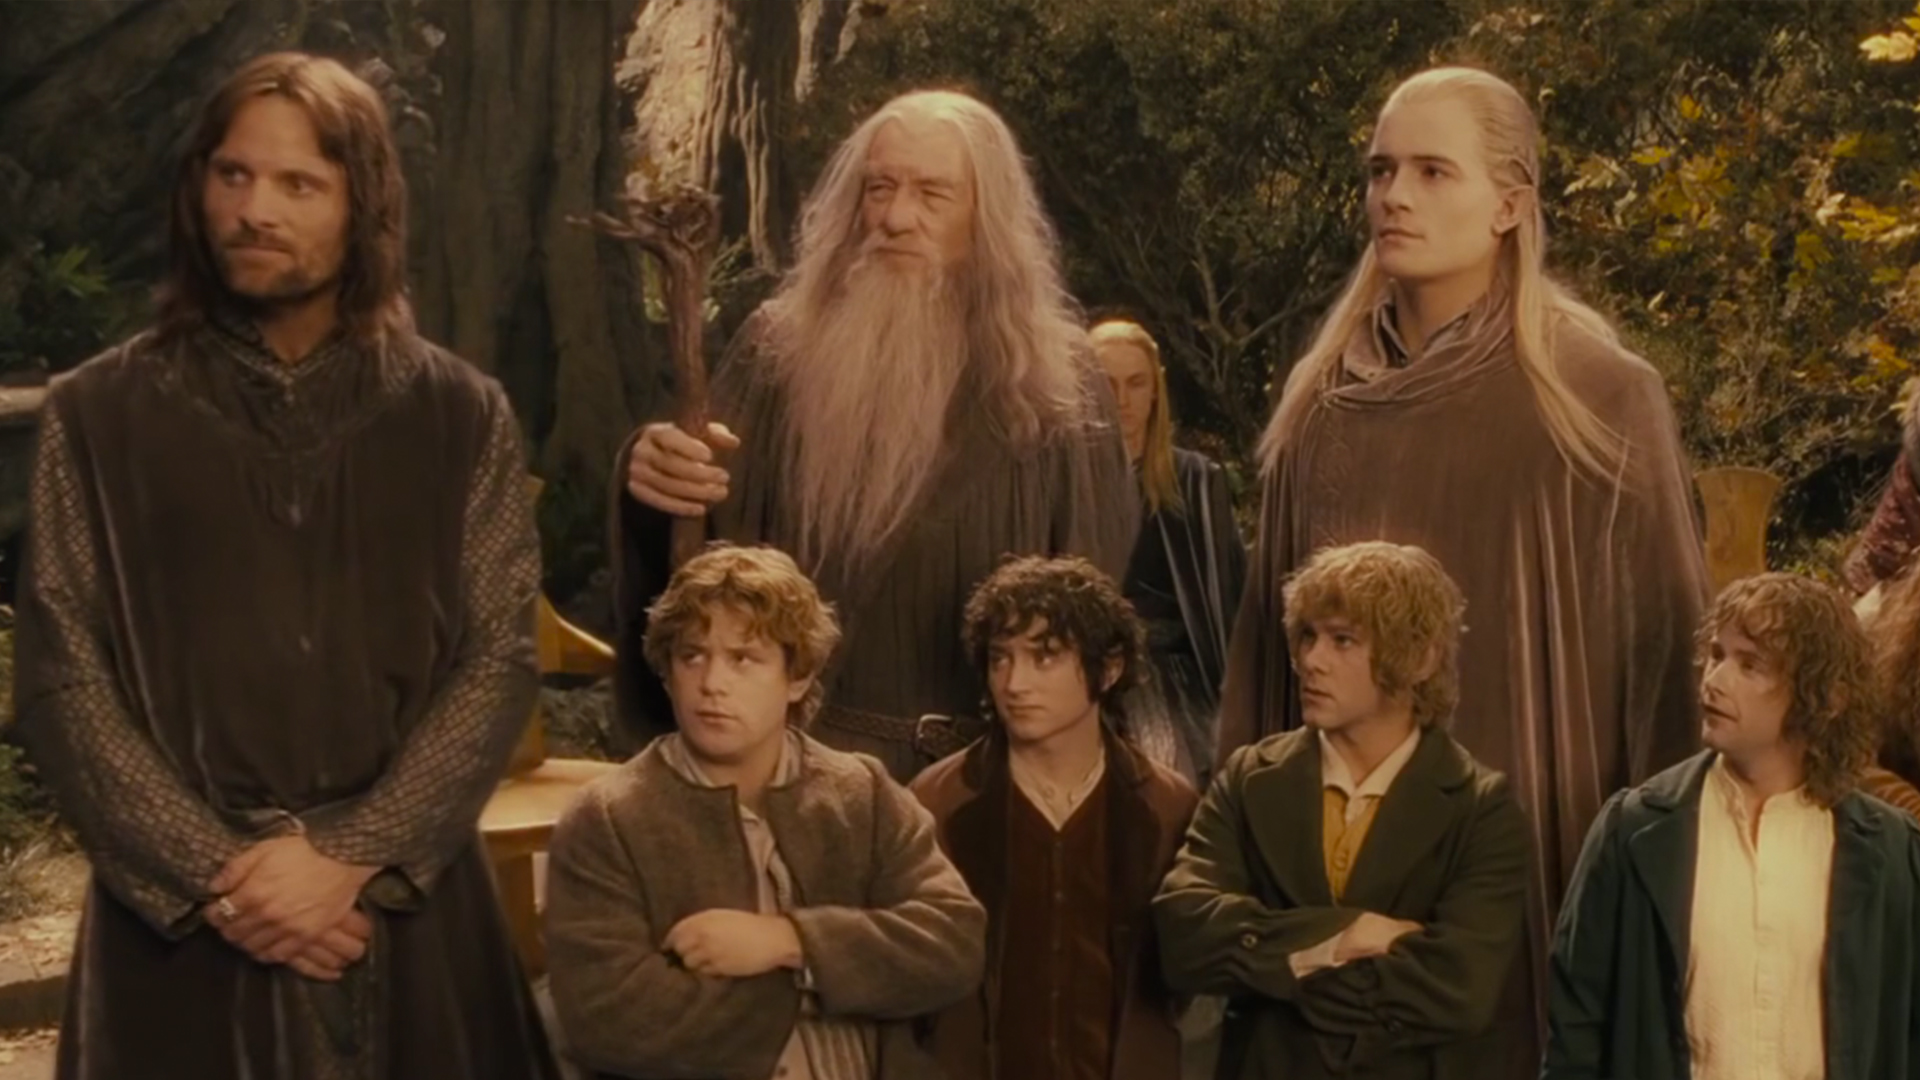 Fan-made trailer for Wes Anderson's The Lord of the Rings